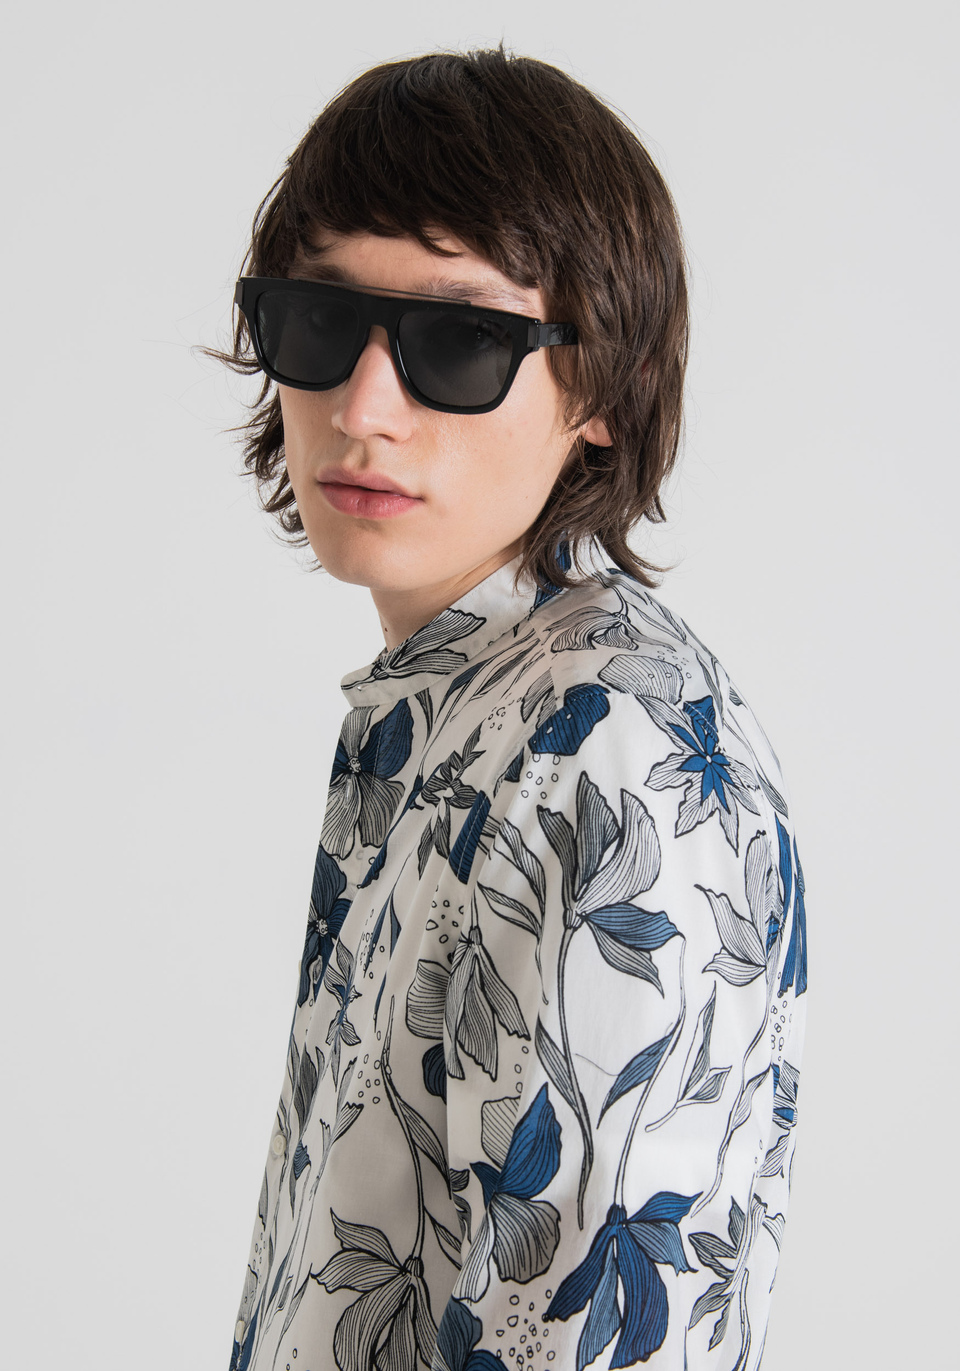 “MADRID” STRAIGHT-FIT SHIRT IN PURE COTTON WITH FLORAL PRINT - Antony Morato Online Shop